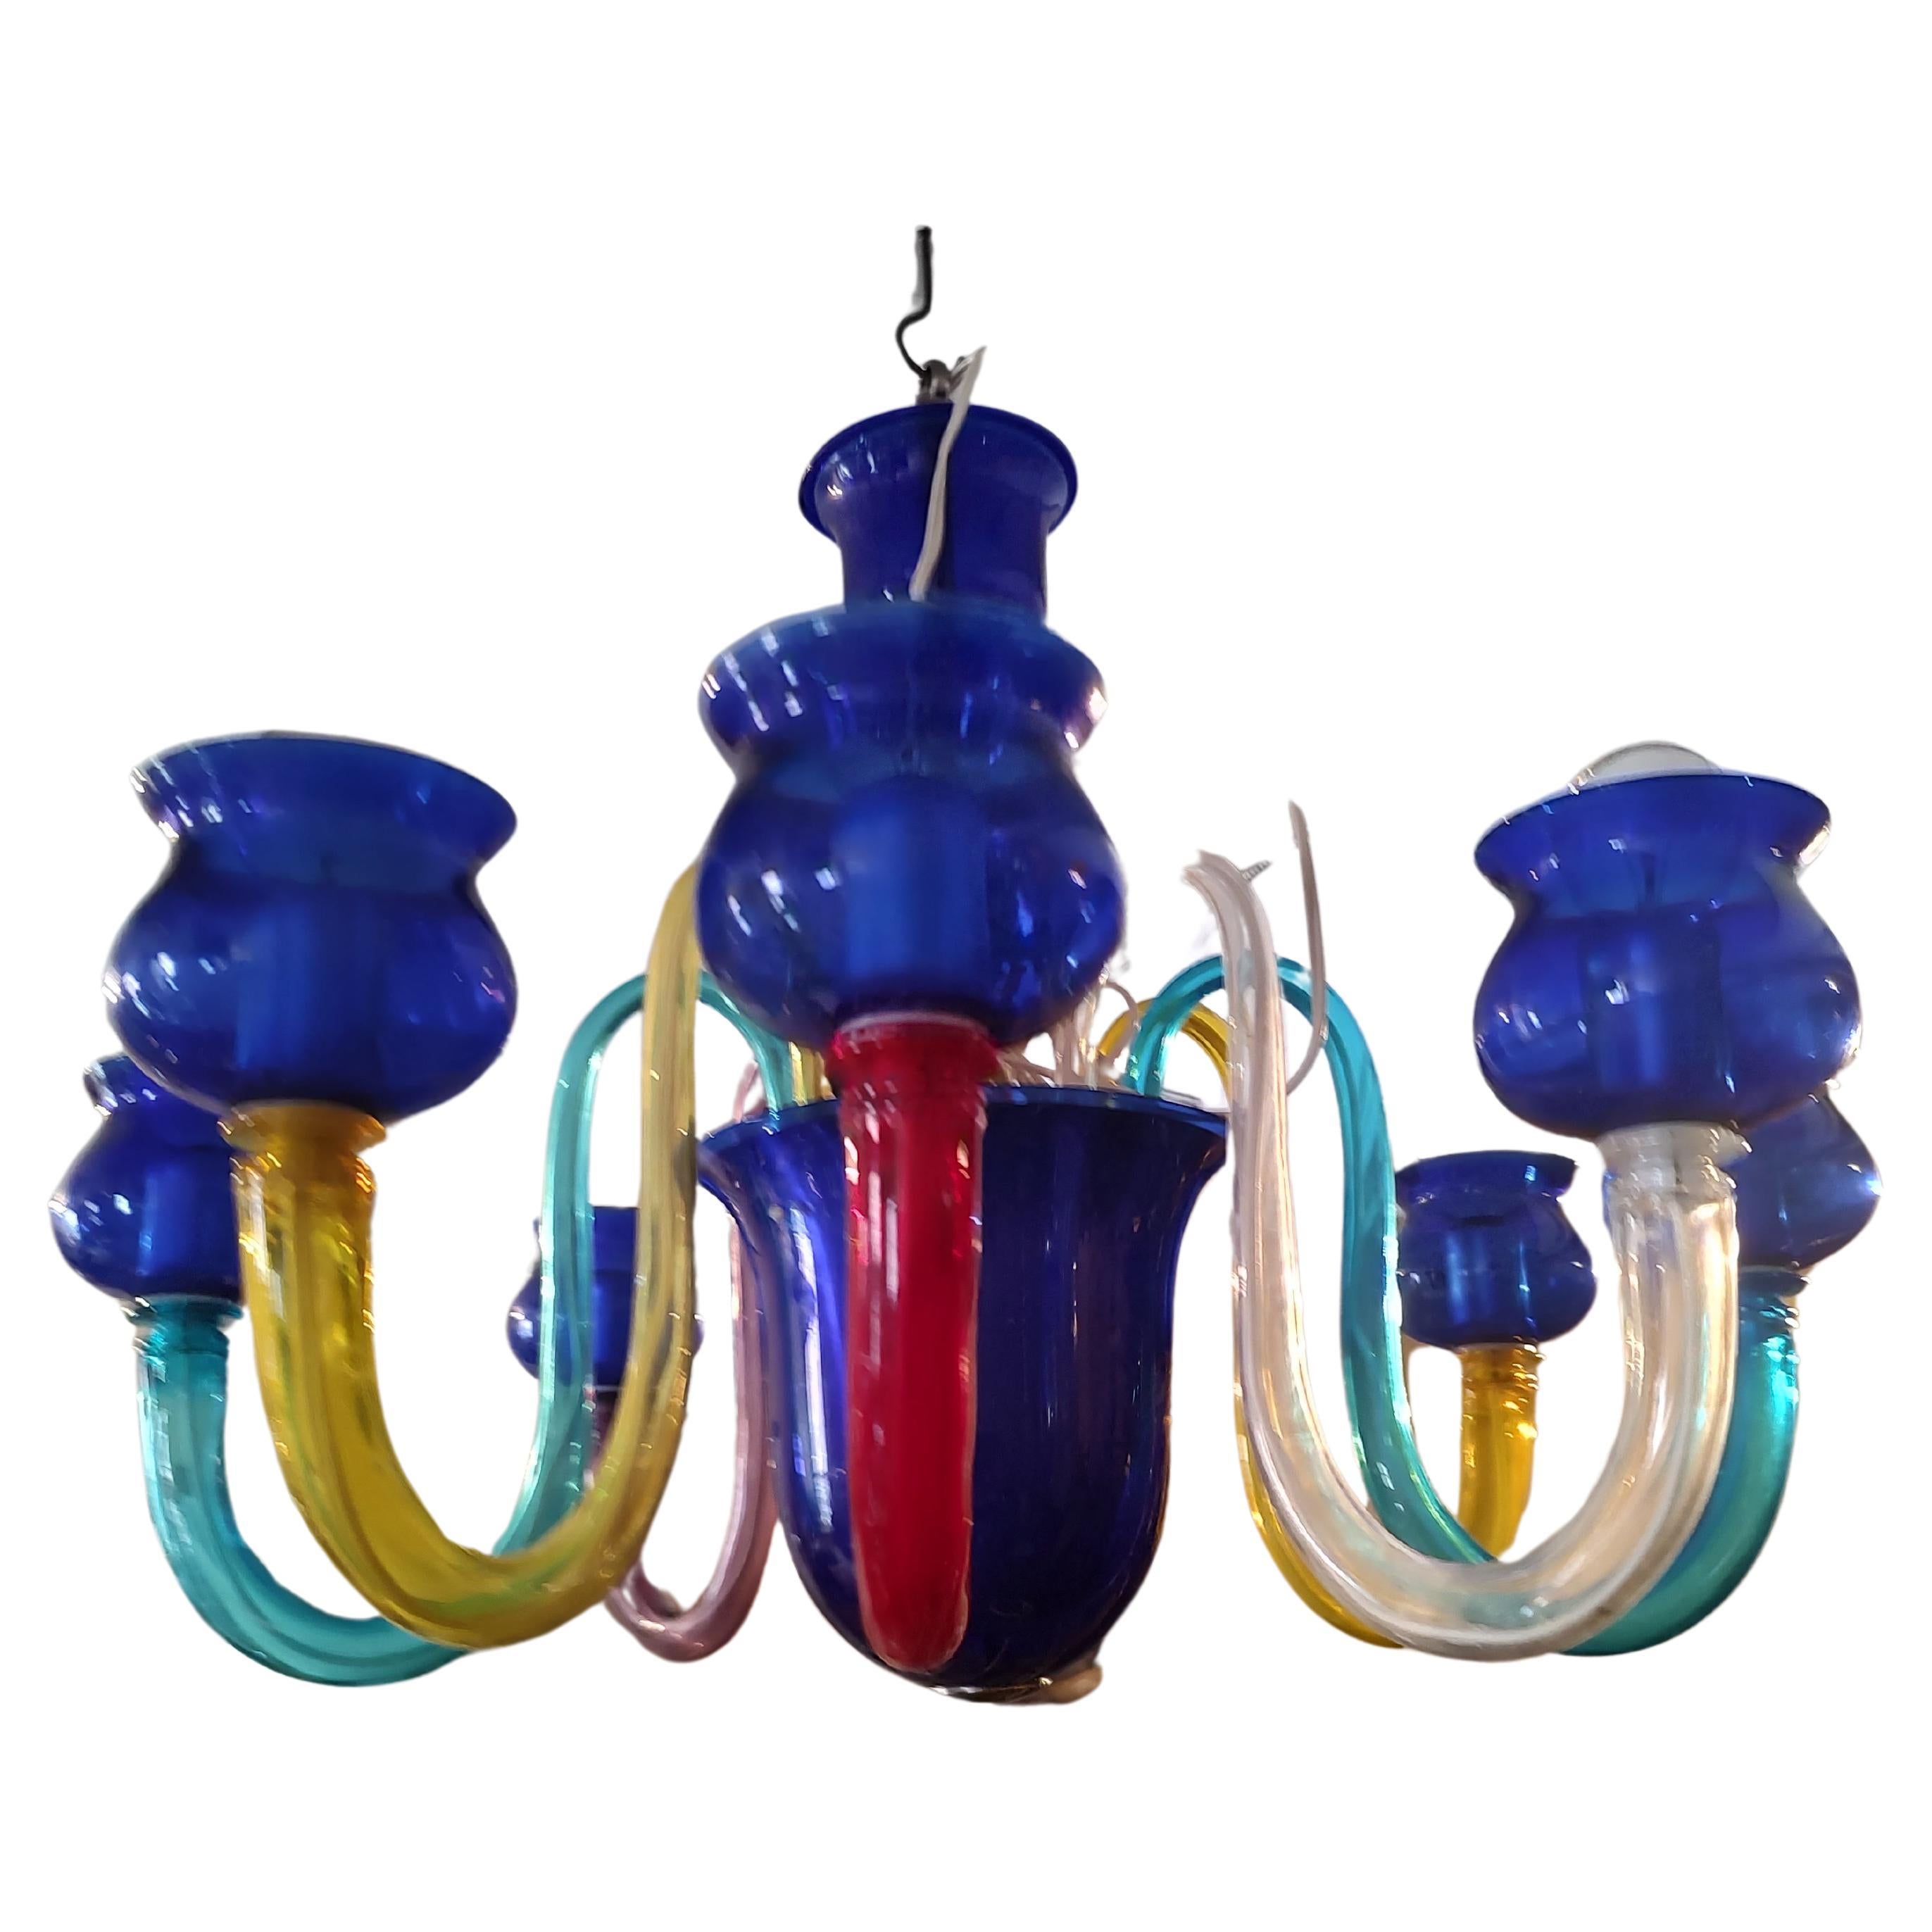 Fabulous and elegant, vibrantly constructed 8 Arm venetian chandelier from Murano. Eight elegantly bent colored arms, 2 red 2 yellow 2 blue 1 amethyst and 1 clear make up the chandelier with 8 blue cups that surround the bulbs. Blue and clear